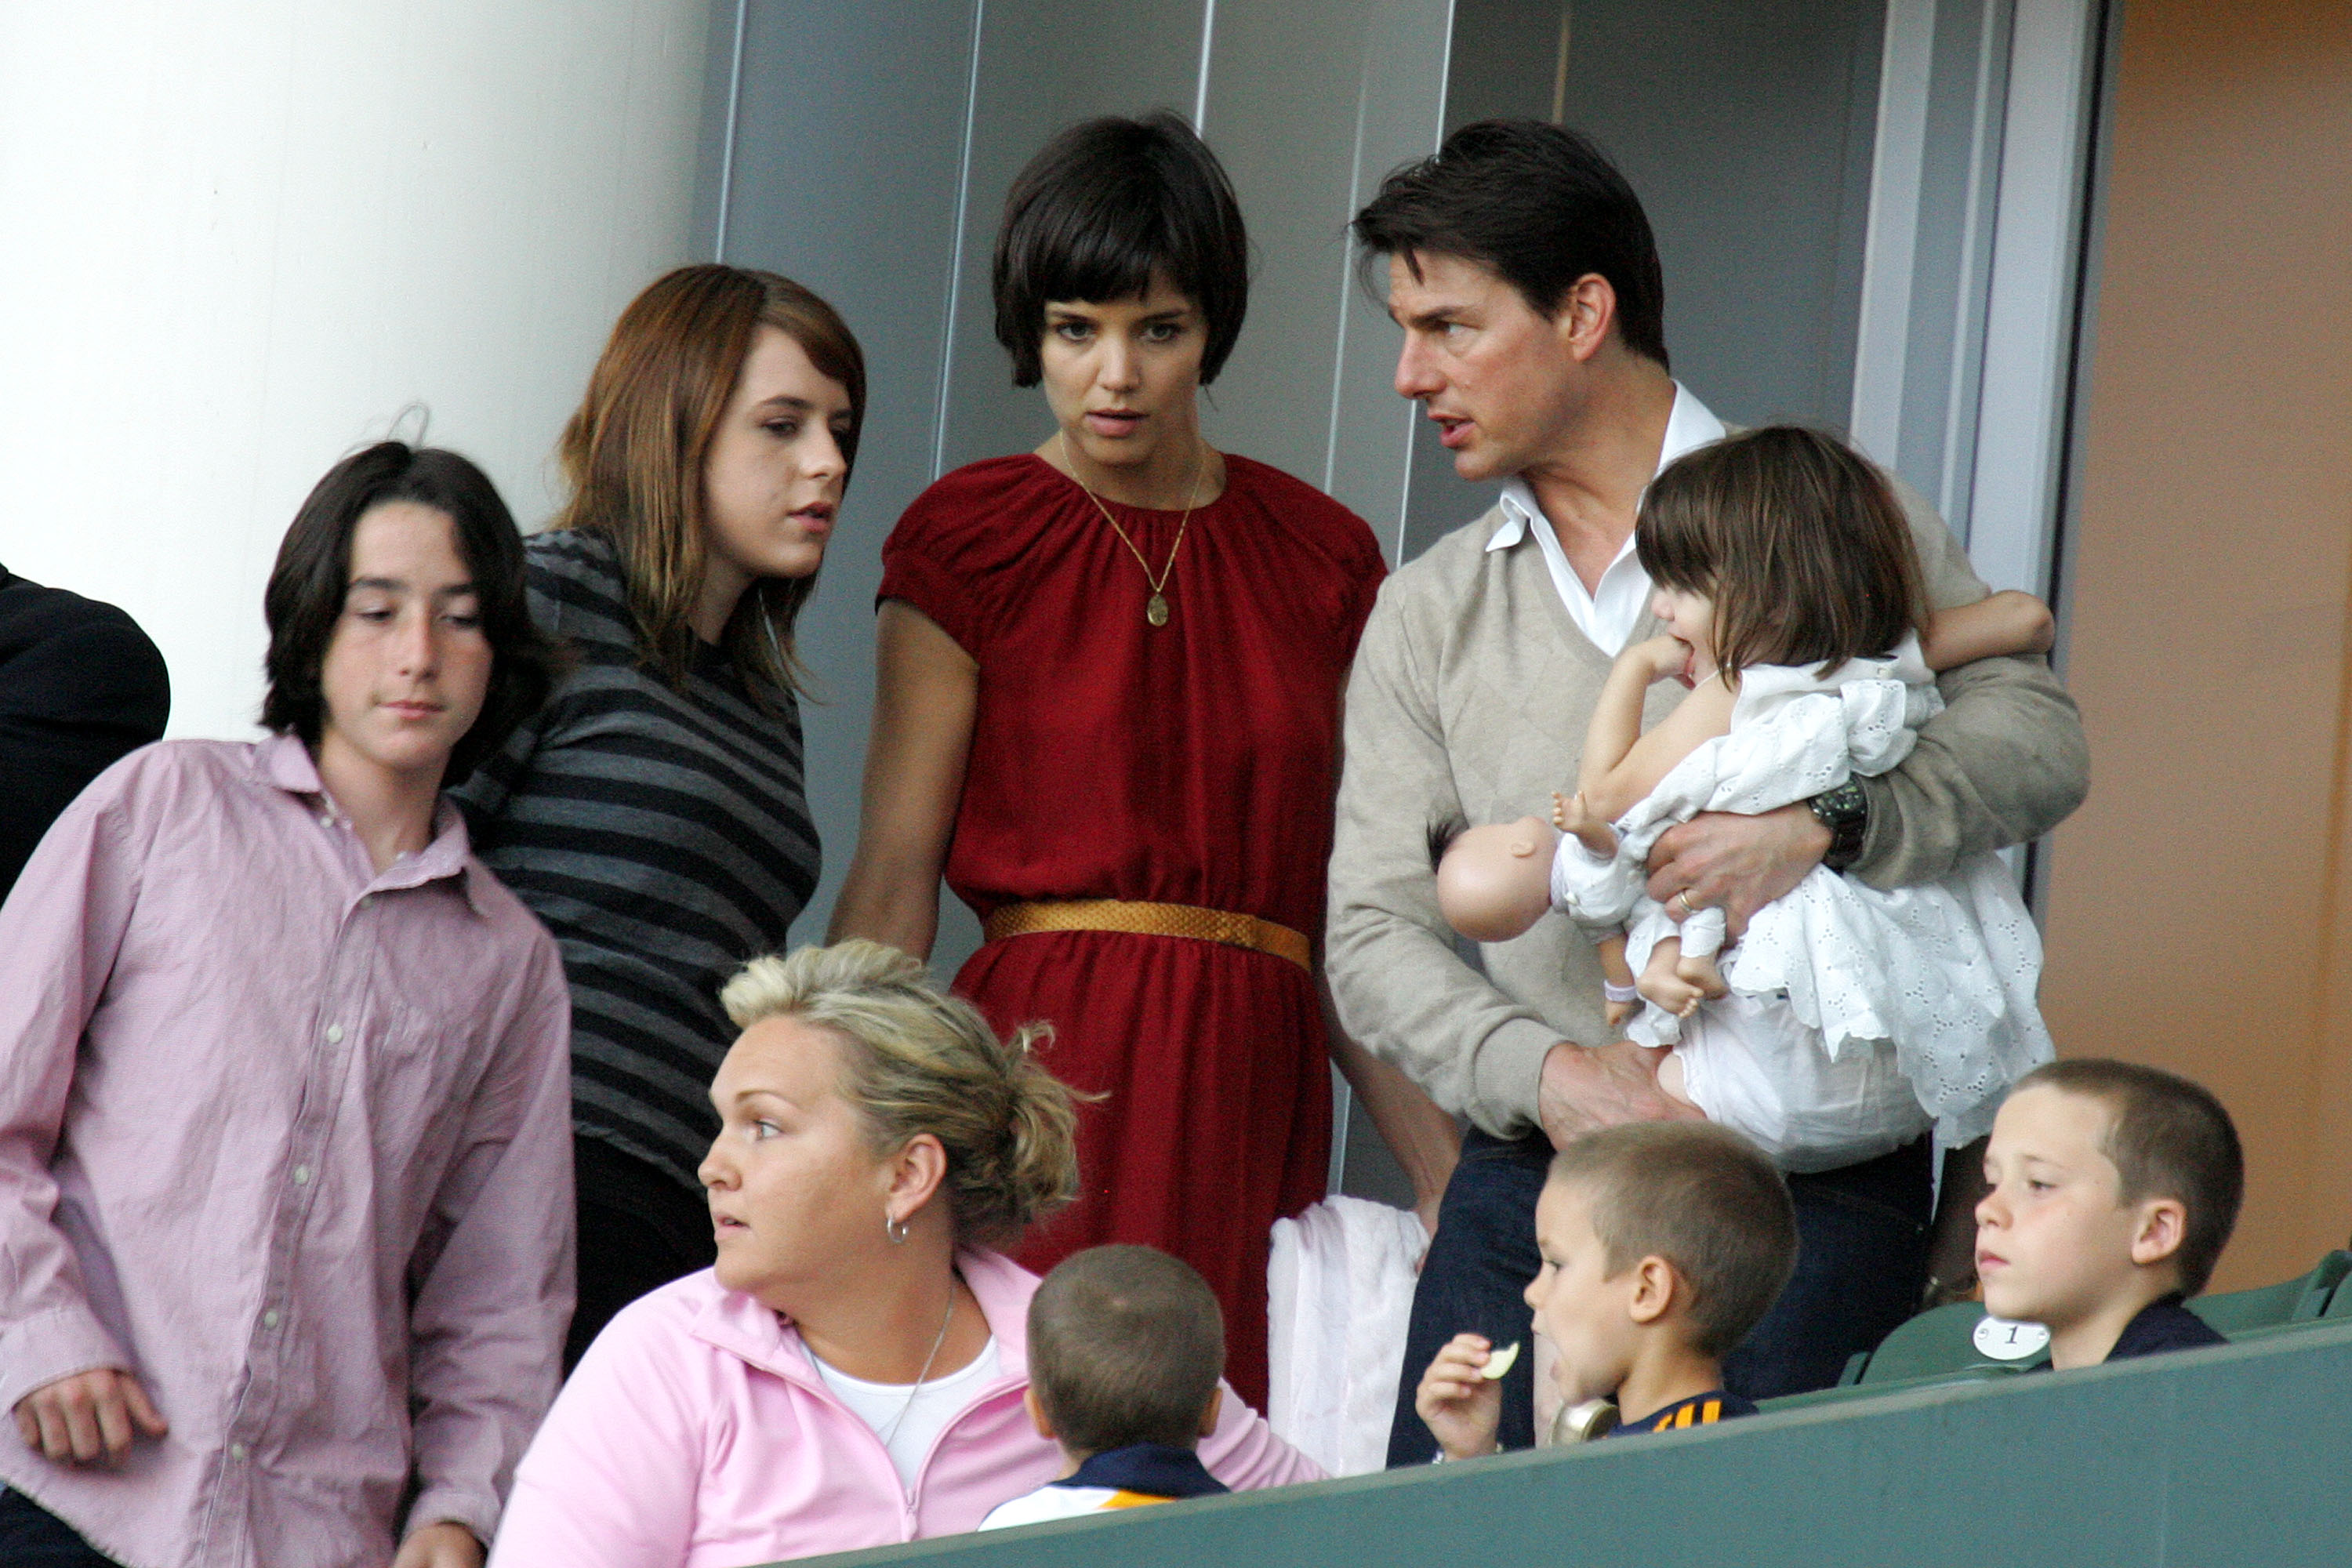 Tom Cruise and Katie Holmes with their daughters Suri Cruise and Isabella Kidman-Cruise and David Beckham's sons Brooklyn, Romeo, and Cruz Beckham, watch the Major League Soccer match on May 10, 2008, in Carson, California | Source: Getty Images